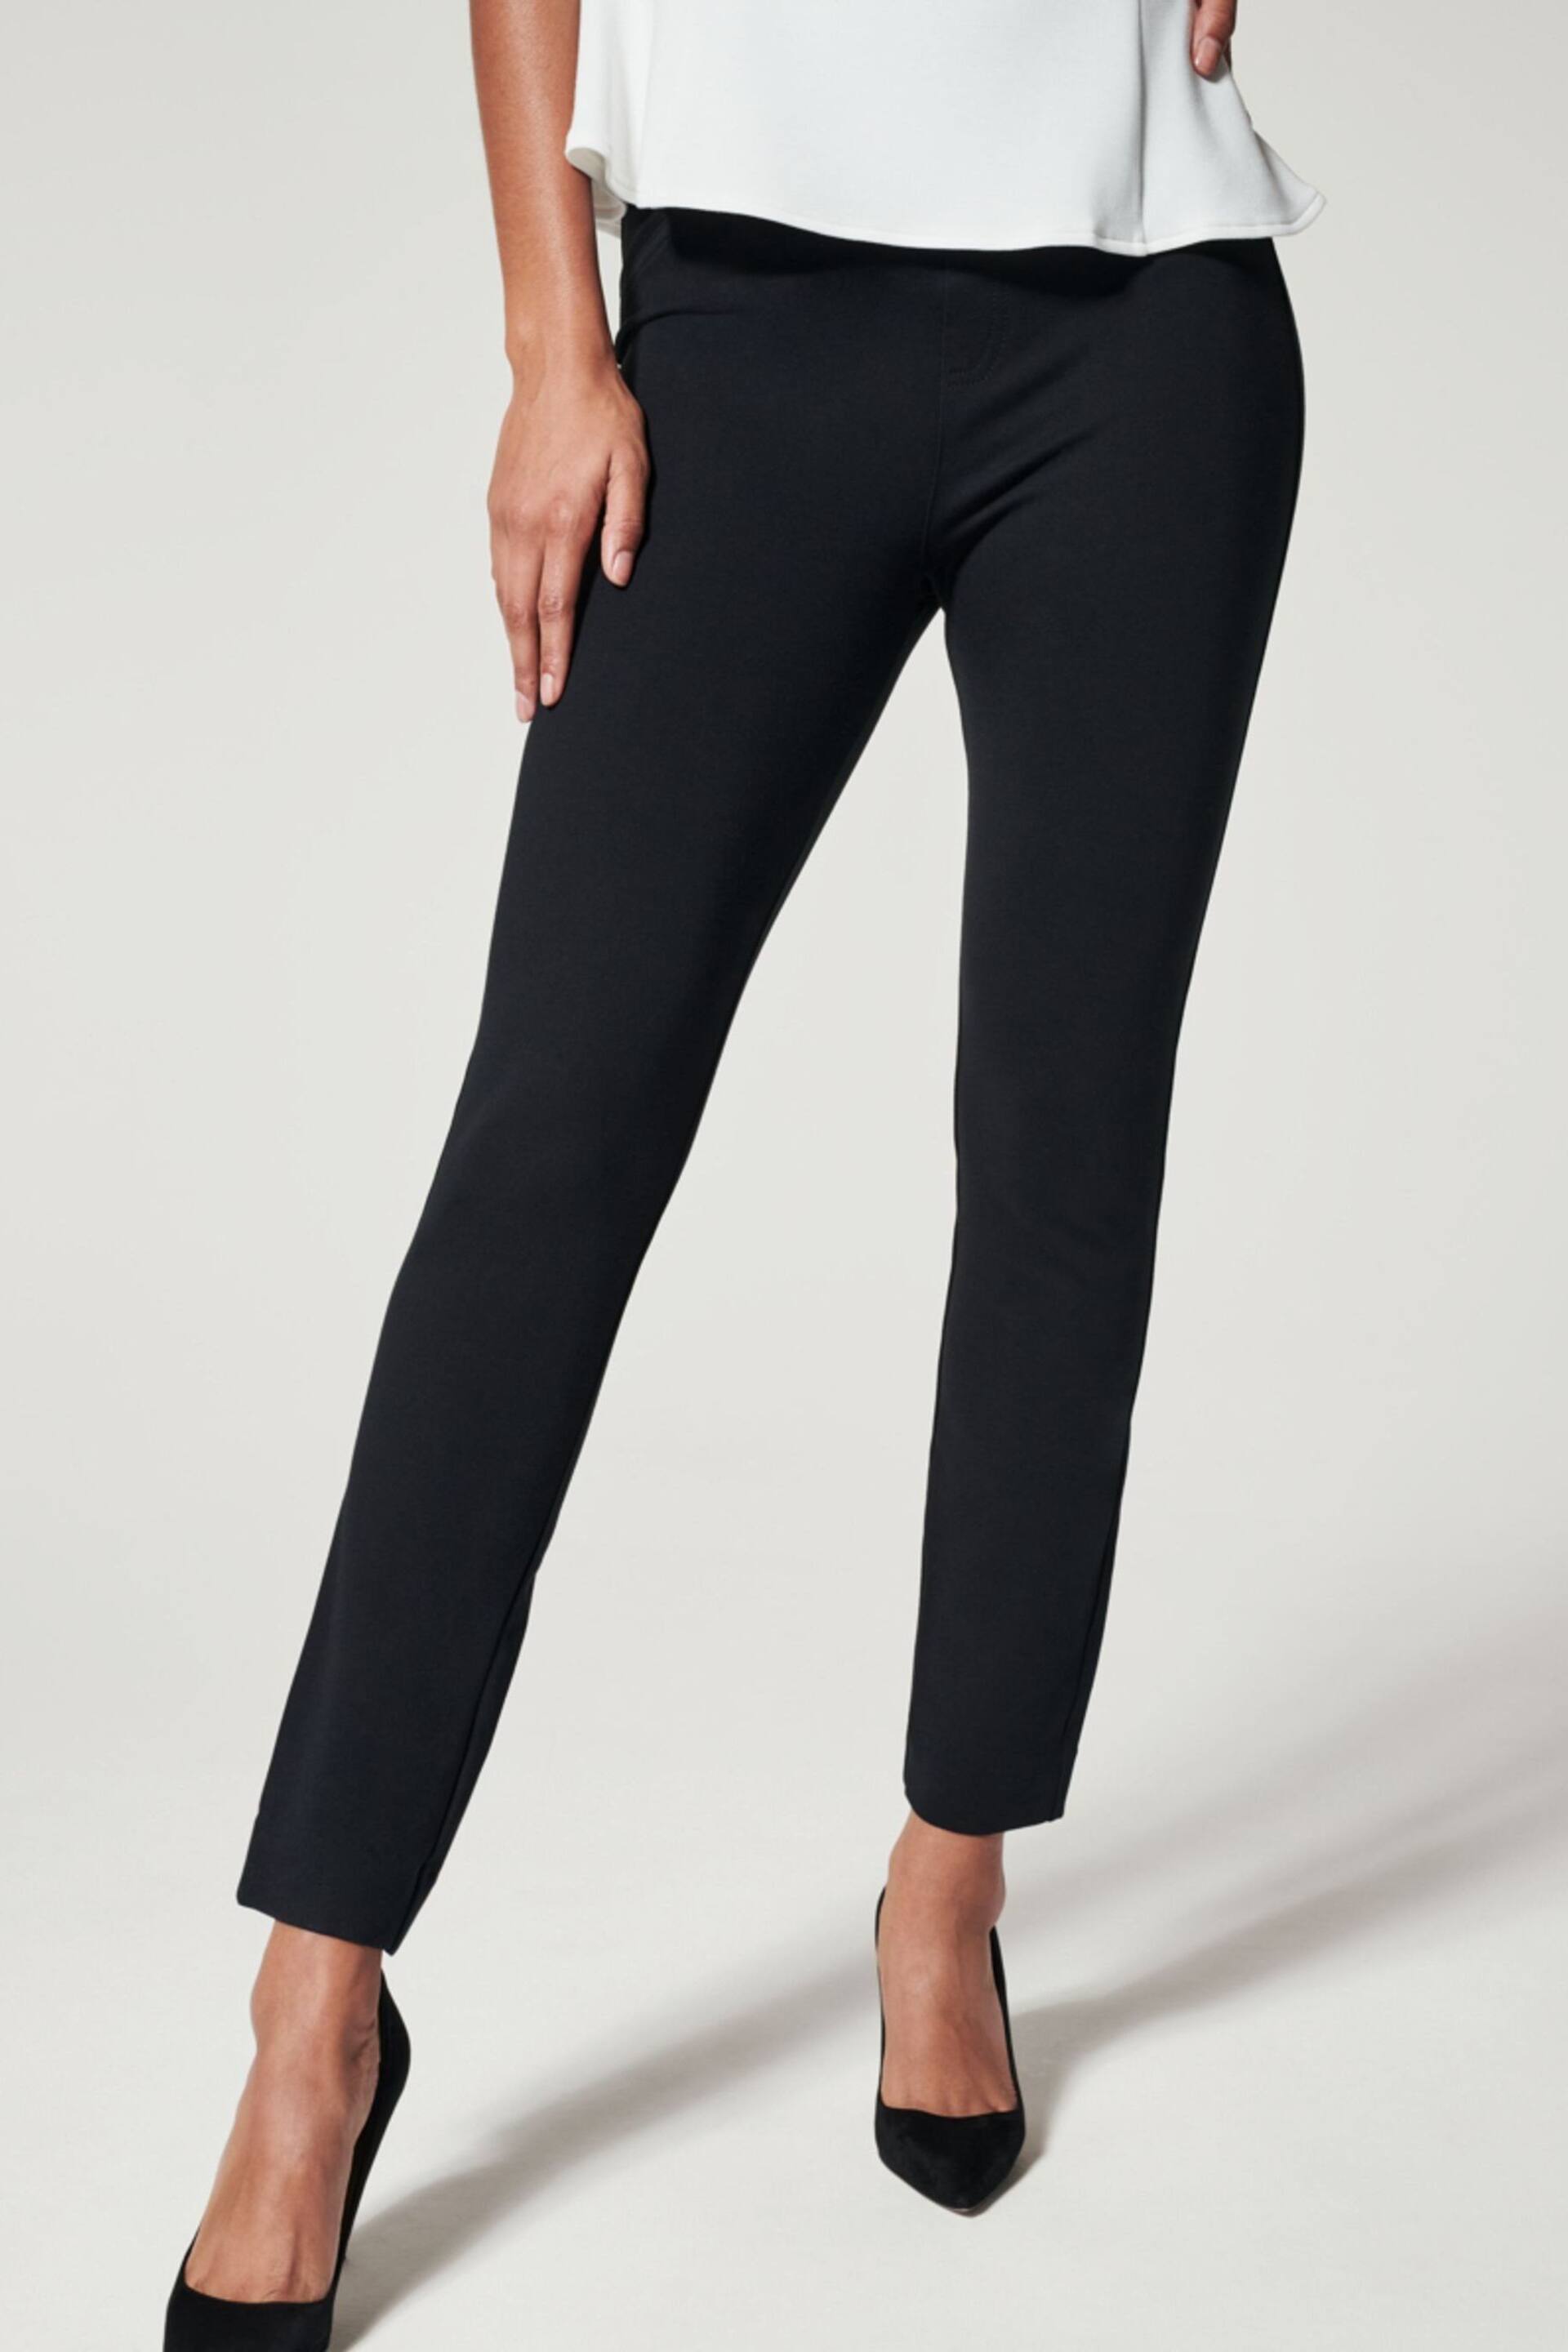 SPANX® Medium Control The Perfect Trousers, Back Seam Skinny - Image 4 of 7